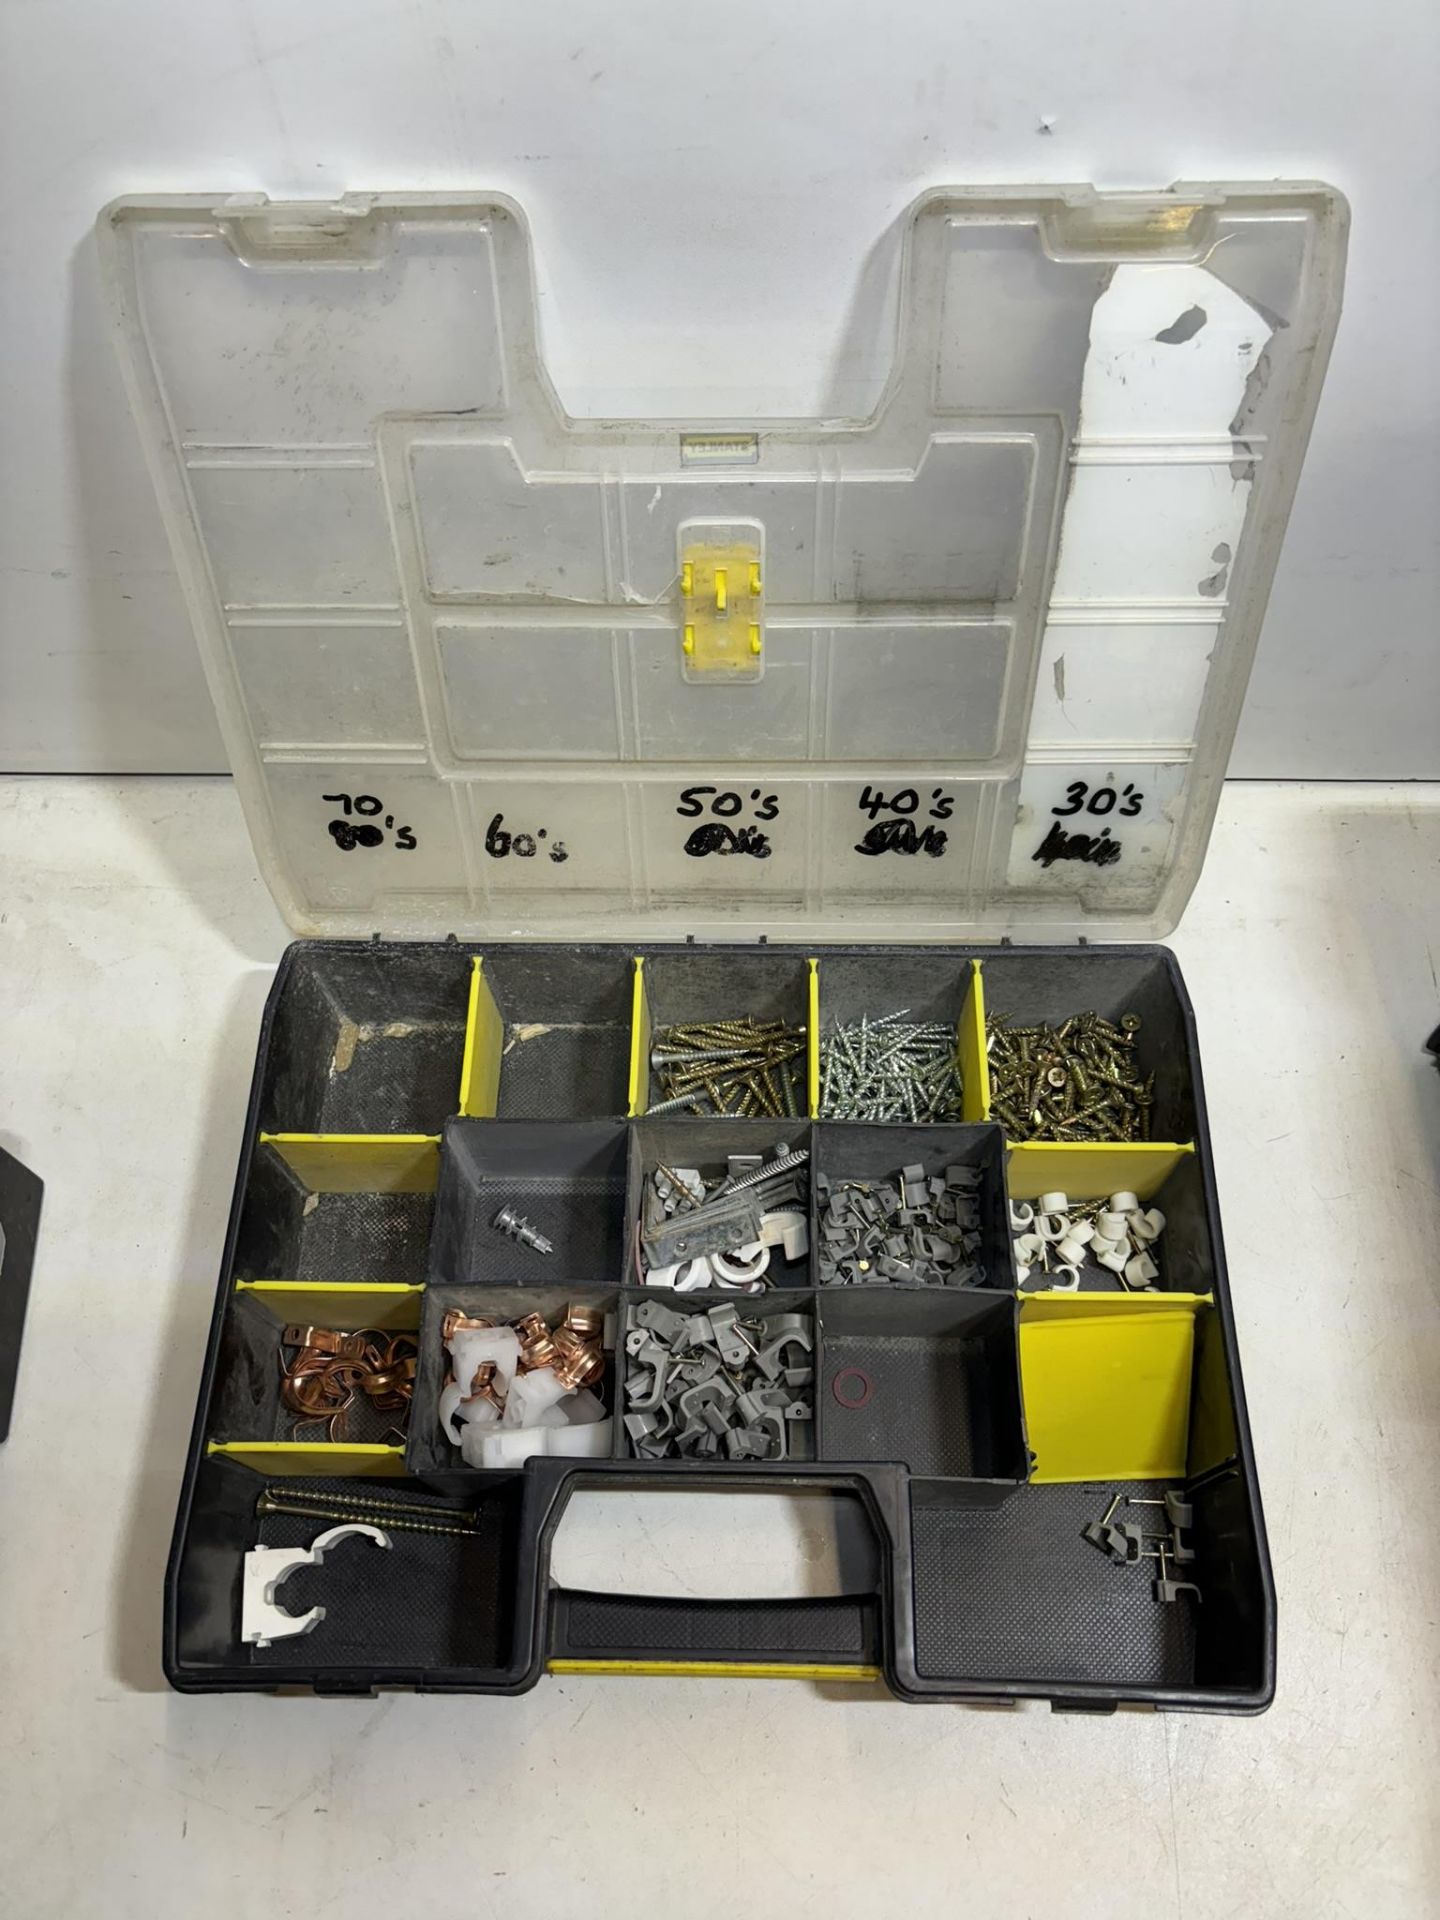 5 x Various Deep Compartment Organisers As Seen In Photos - Image 5 of 11